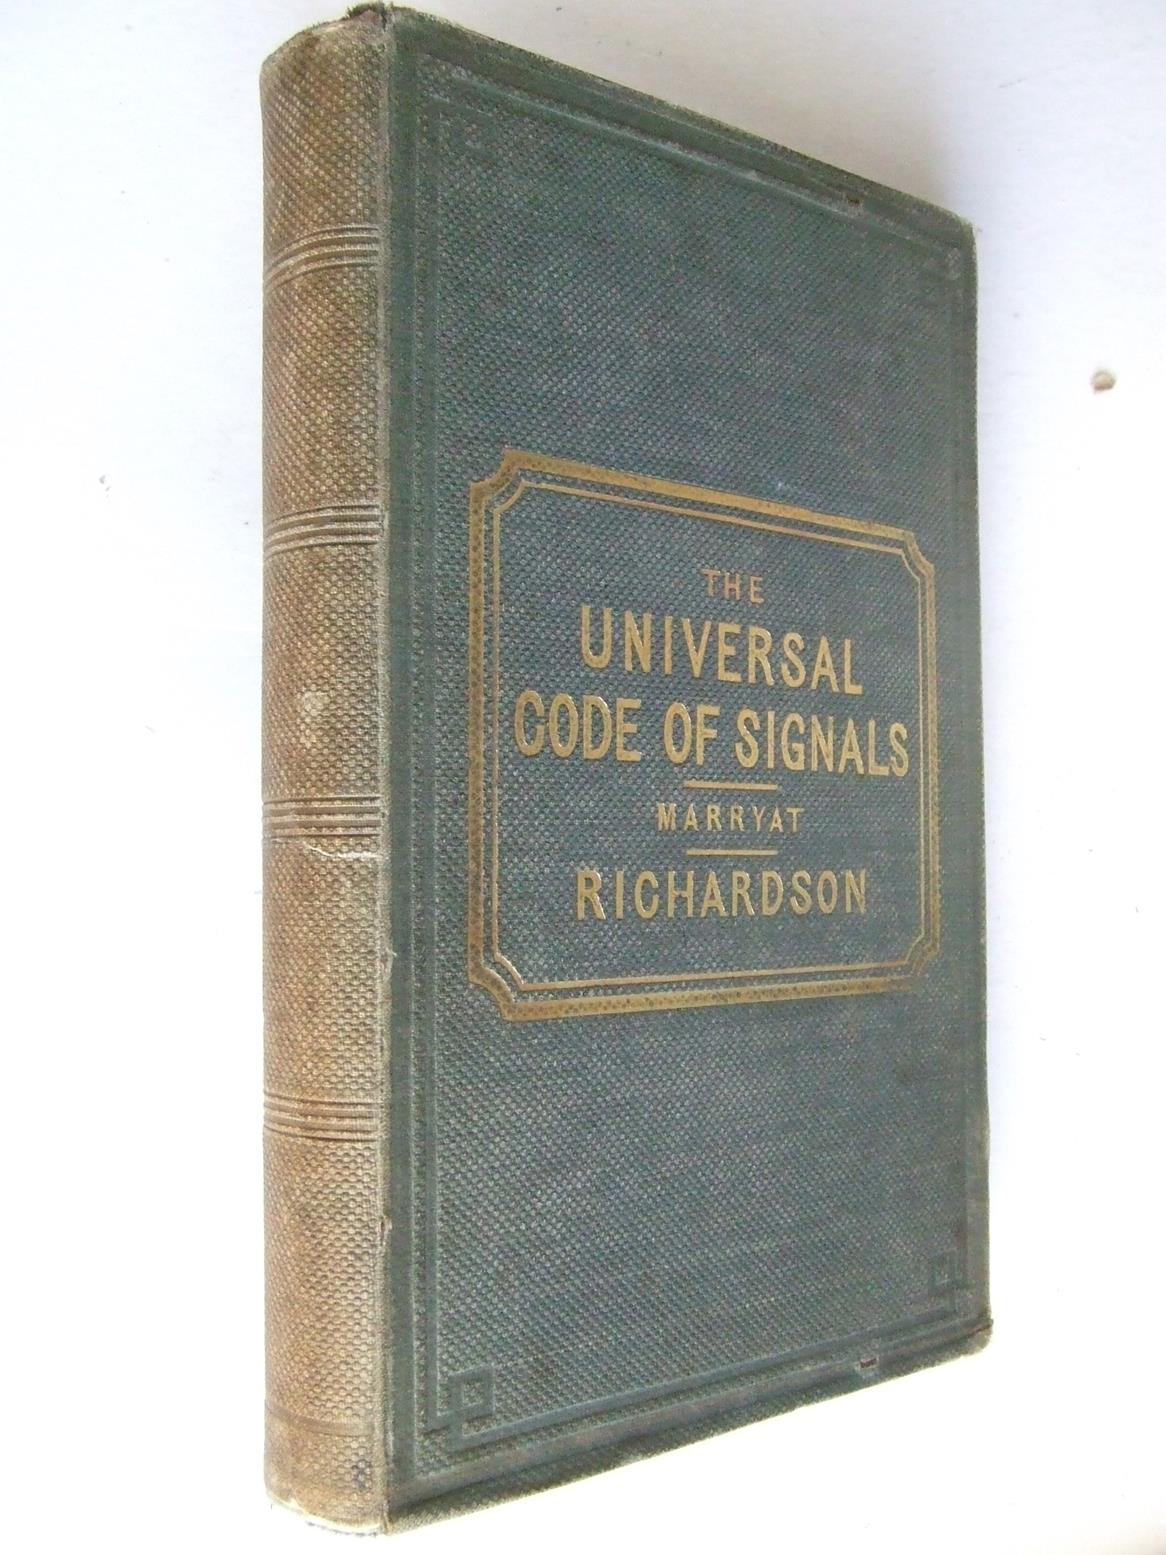 THE UNIVERSAL CODE OF SIGNALS FOR THE MERCANTILE MARINE OF ALL NATIONS